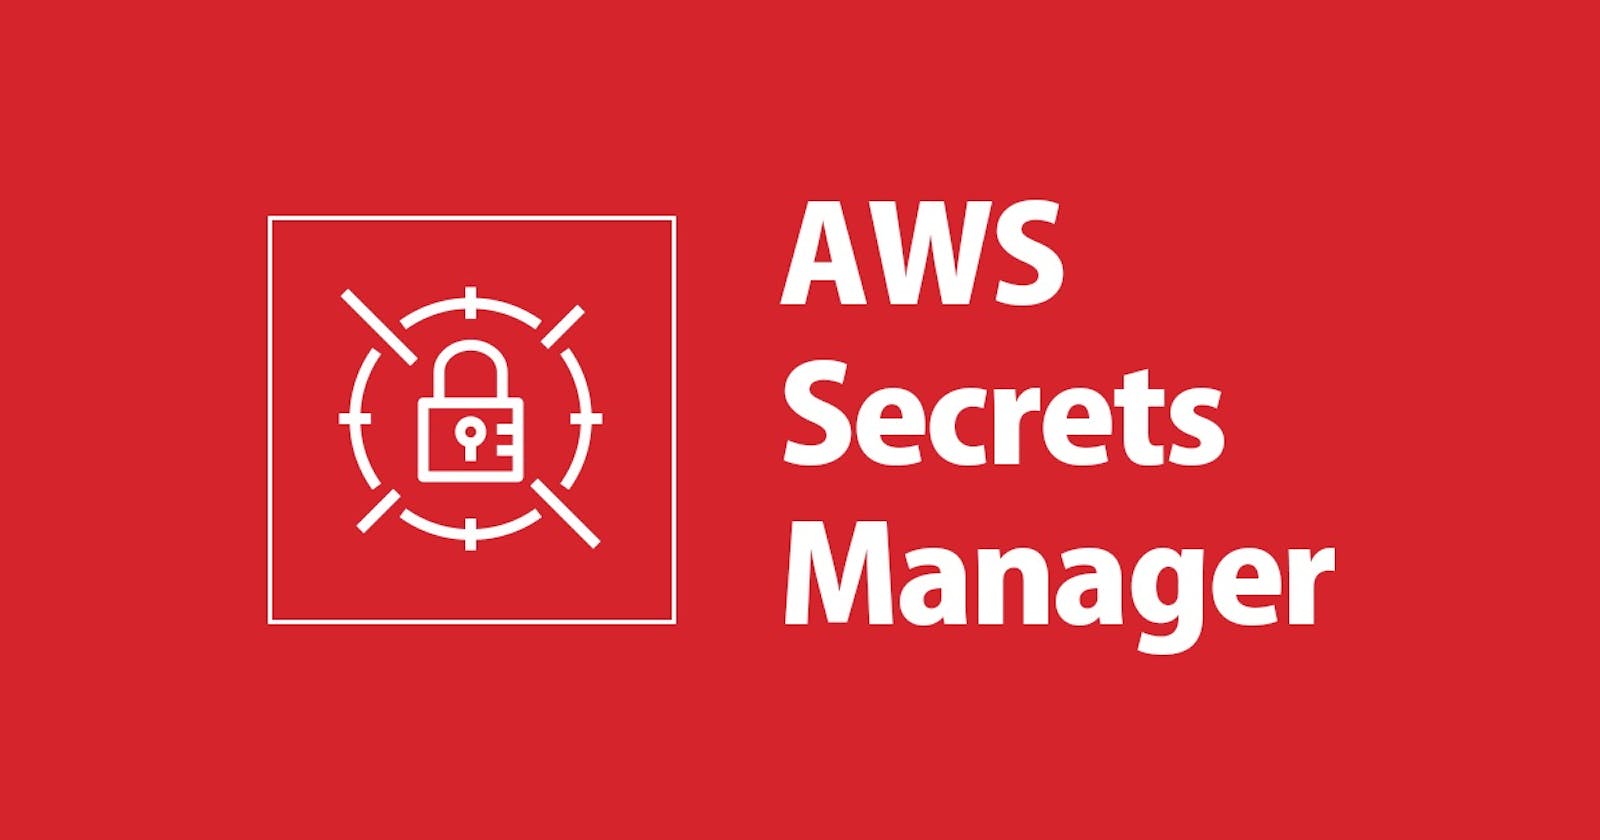 Simplify Your AWS Secrets Management with Flattened JSON